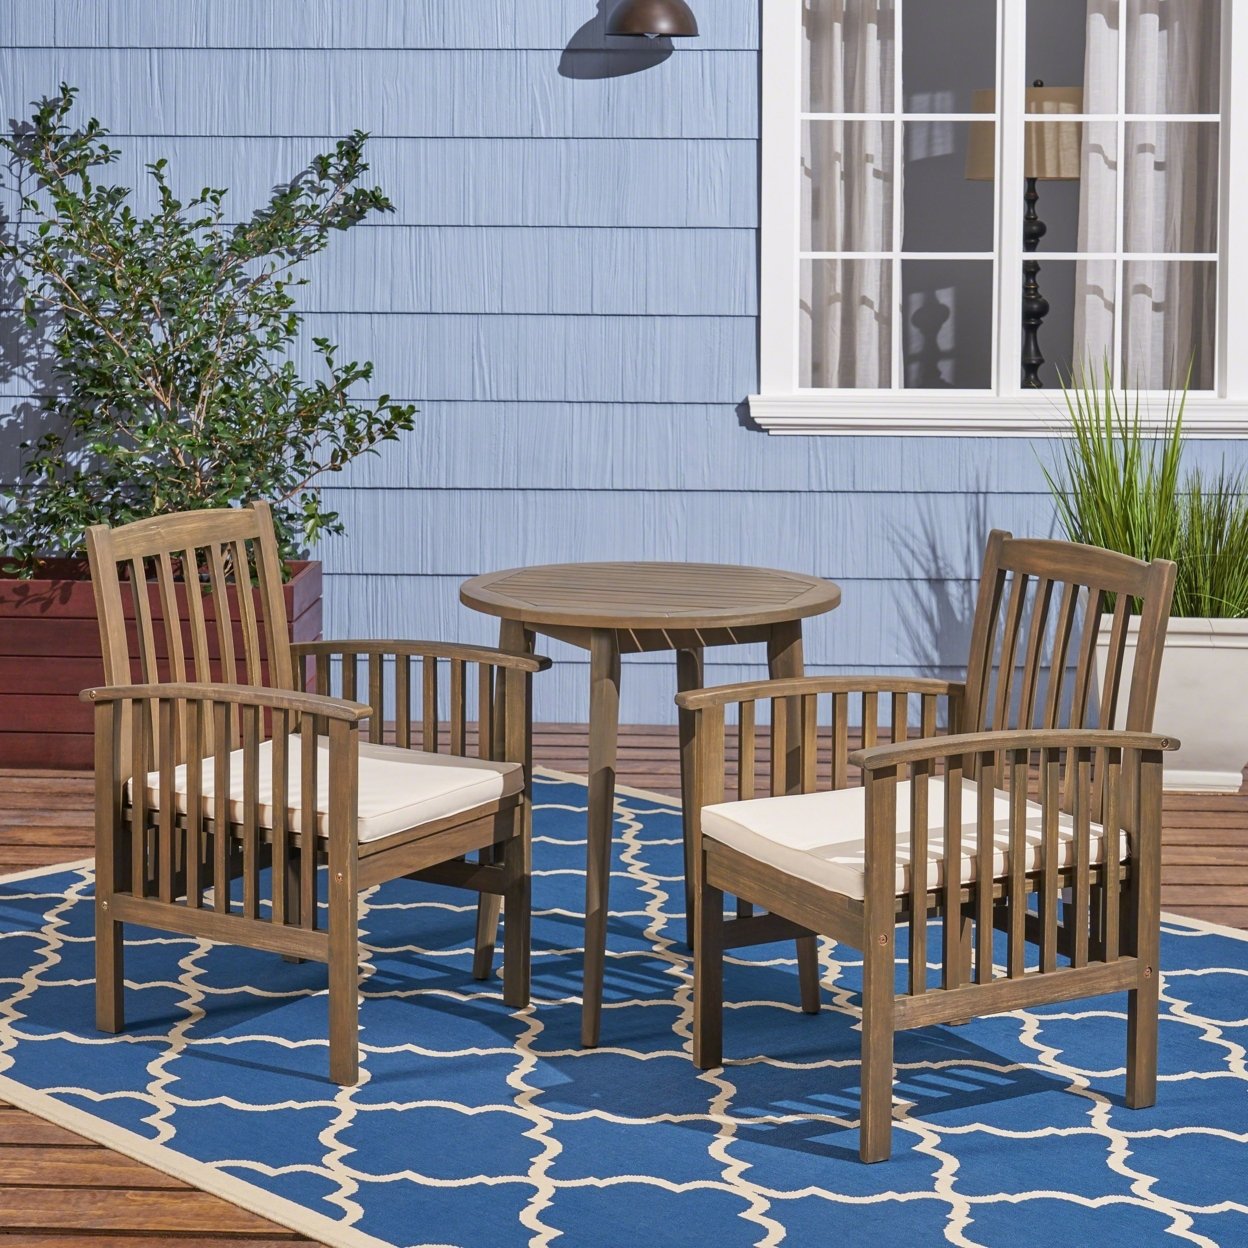 Phoenix Outdoor Acacia 2-Seater Bistro Set With Cushions And 28 Round Table With Straight Legs - Gray Finish + Cream